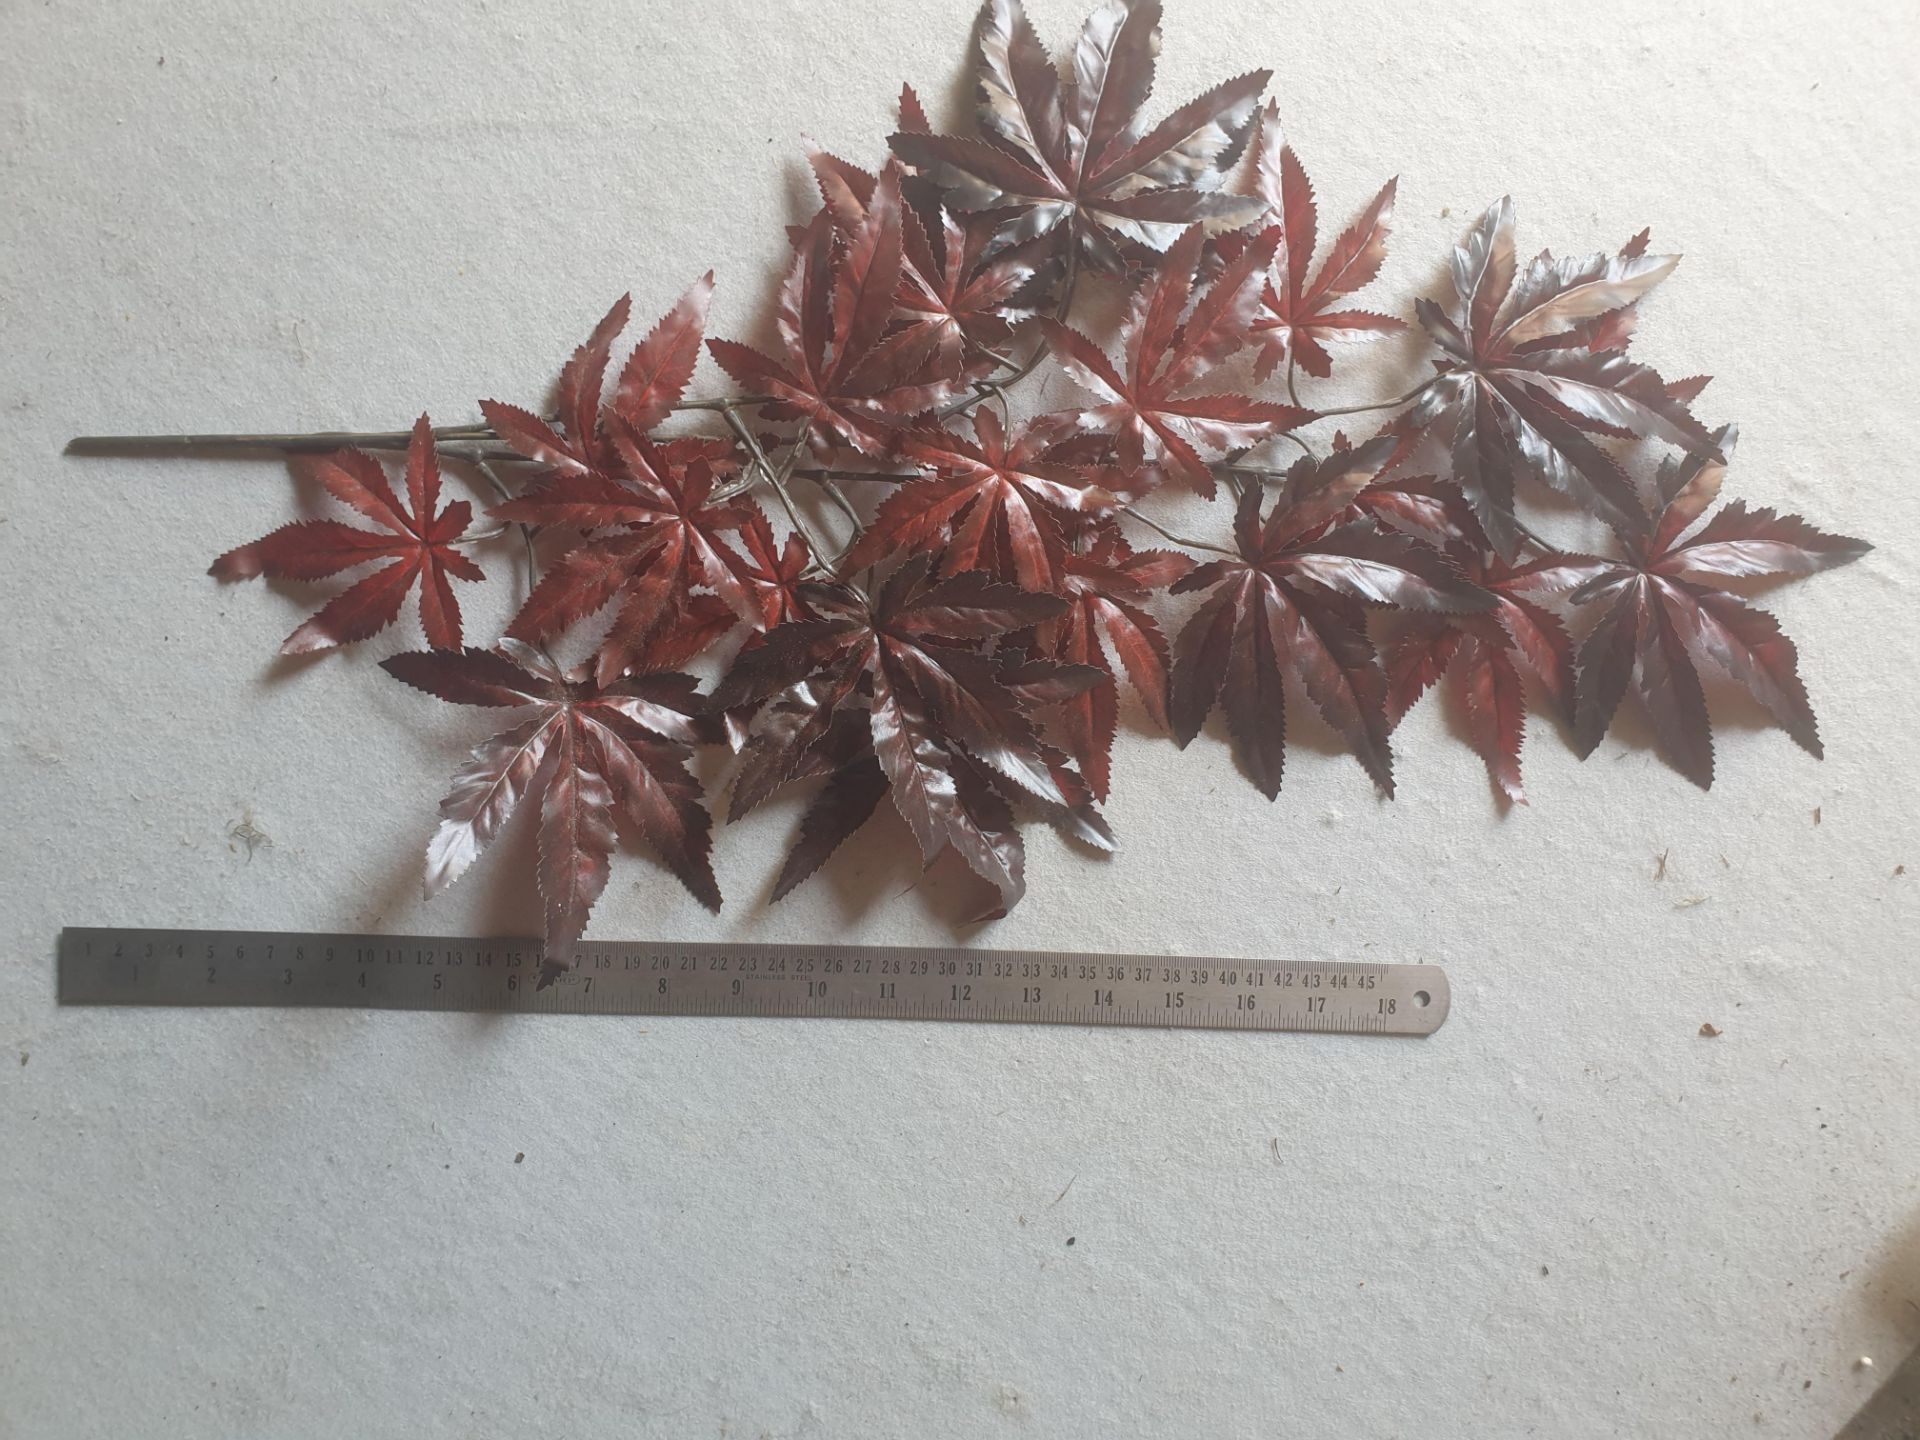 40 Pieces of Artificial Acer foliage spray - Burgandy - Not used